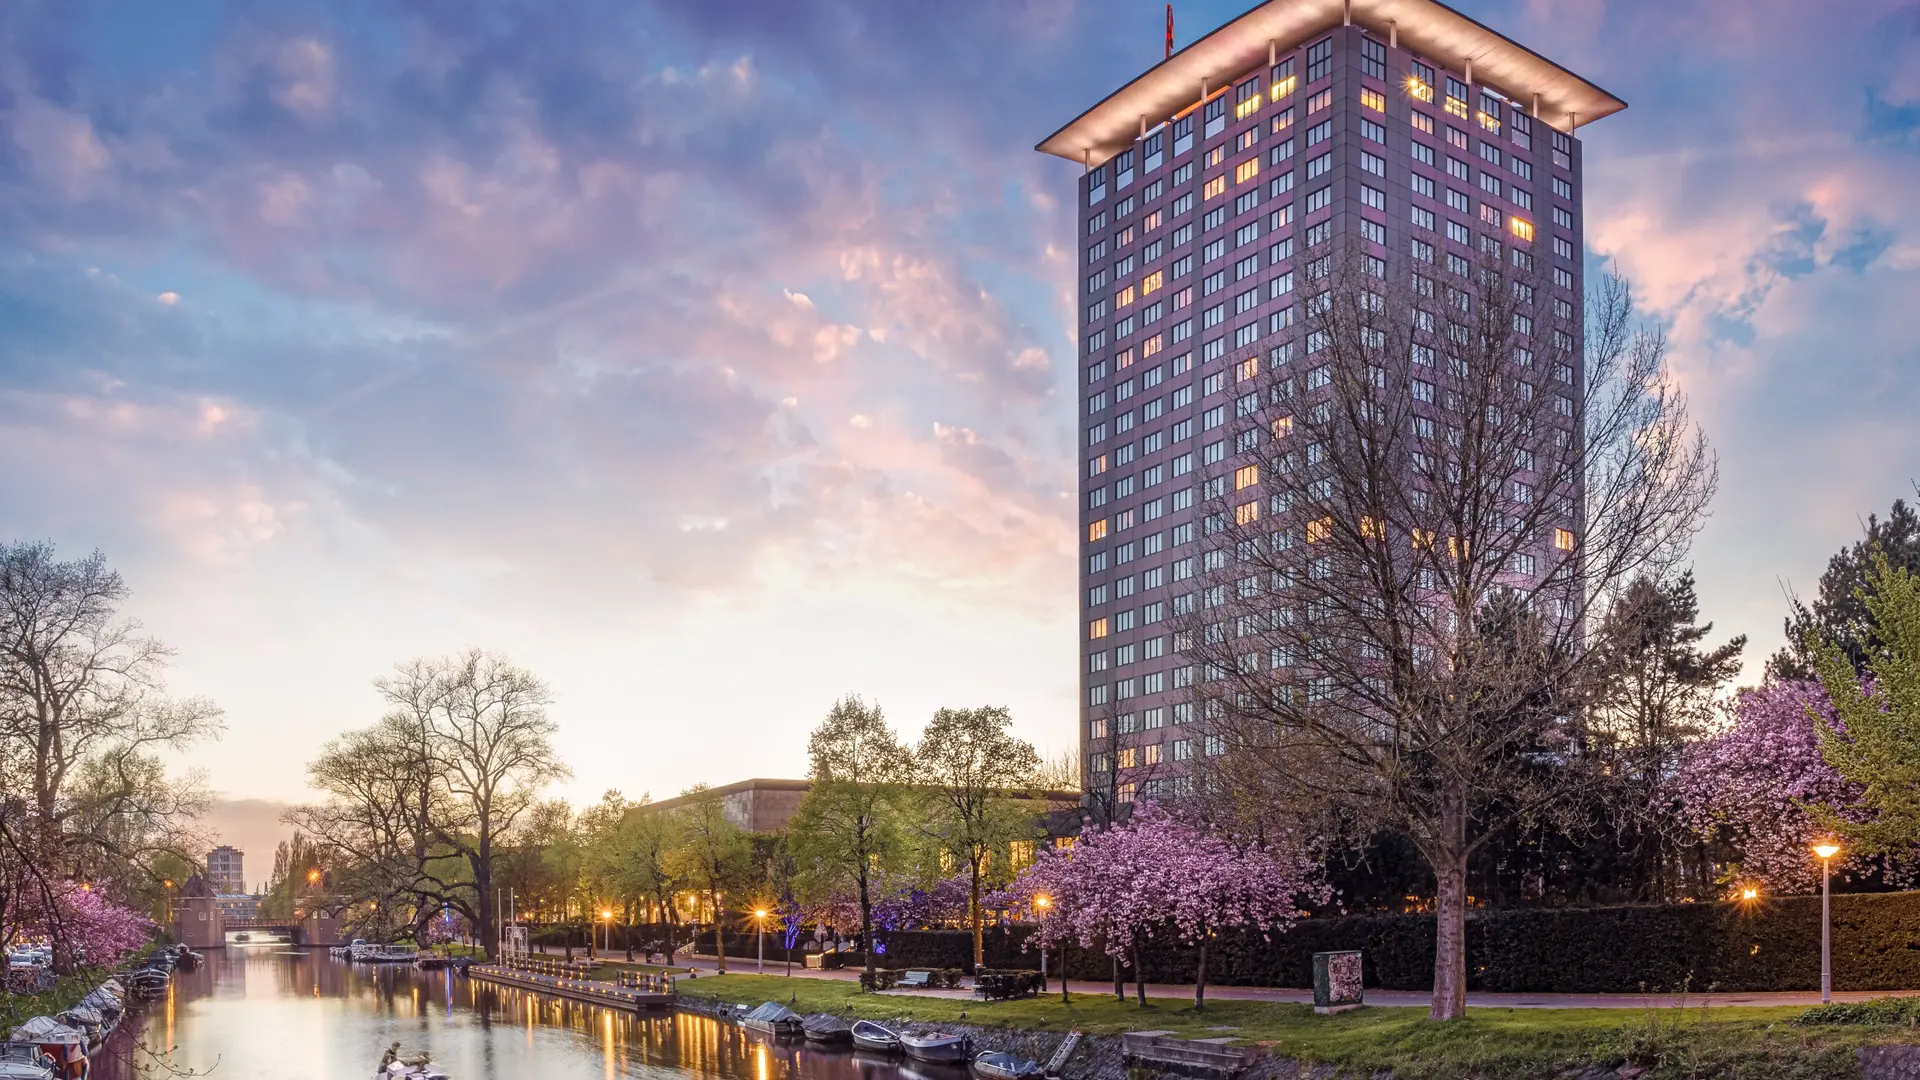 Hotels Toplists - The Best Luxury Hotels in Amsterdam